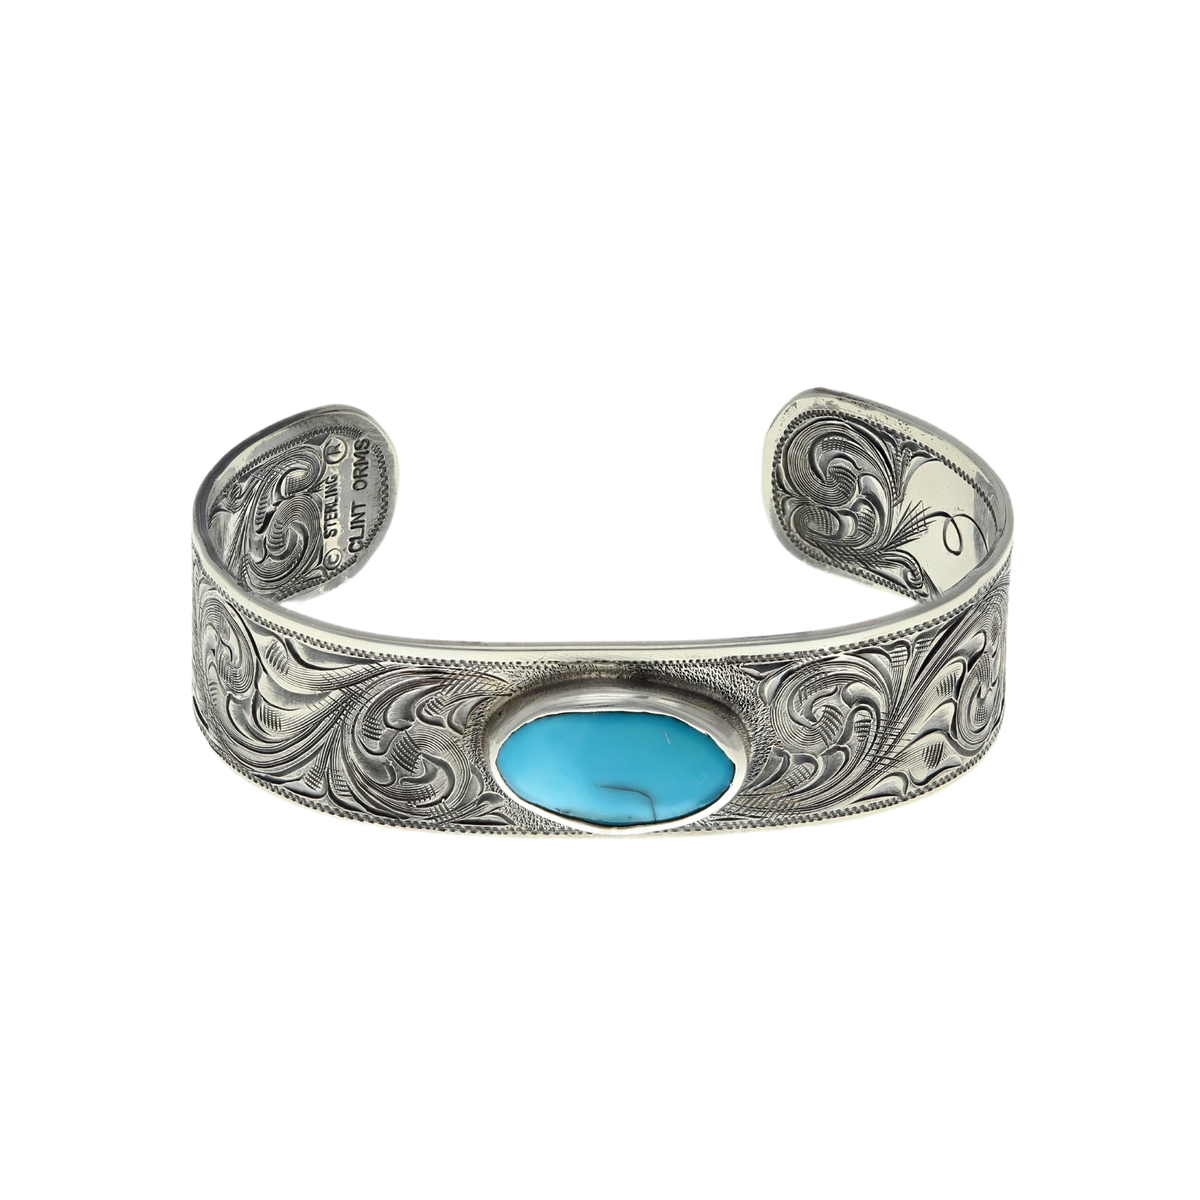 Bracelet 1896 Sterling Silver Engraved with Oval Turquoise